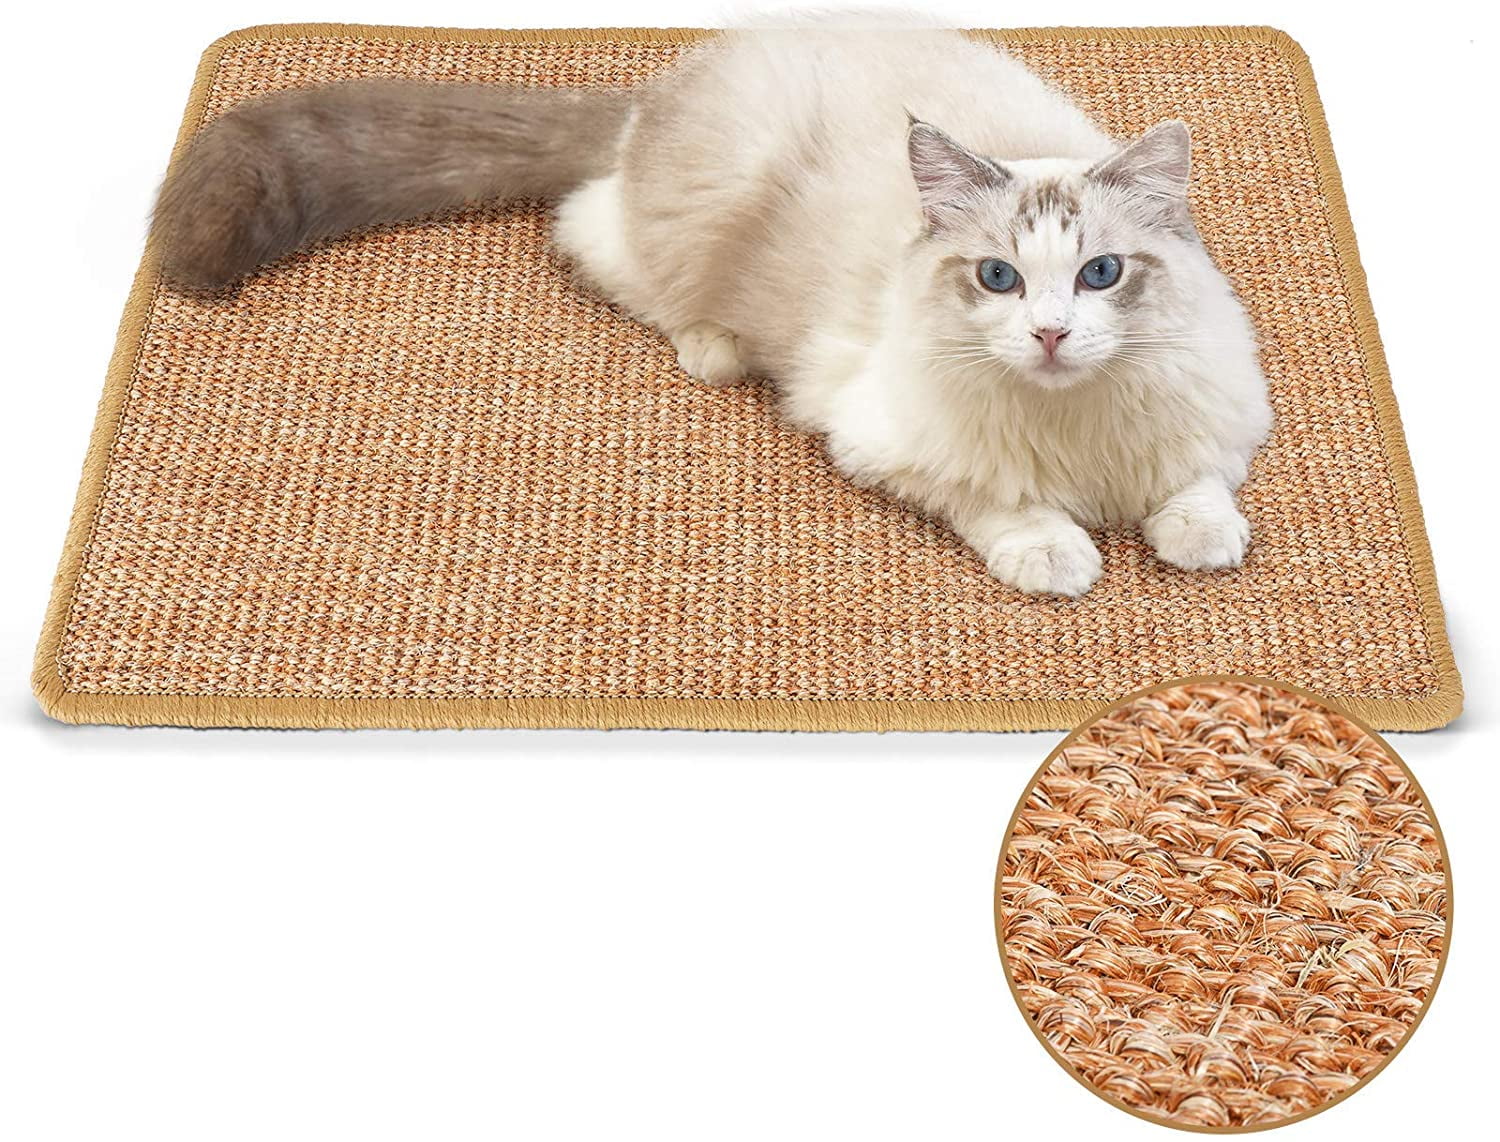 Round Woven Scratching Pad for Cat Grinding Claws Protecting Carpet Rug Furniture Floor Cat Playing Sleeping Pad 1pc Cat Scratcher Mat